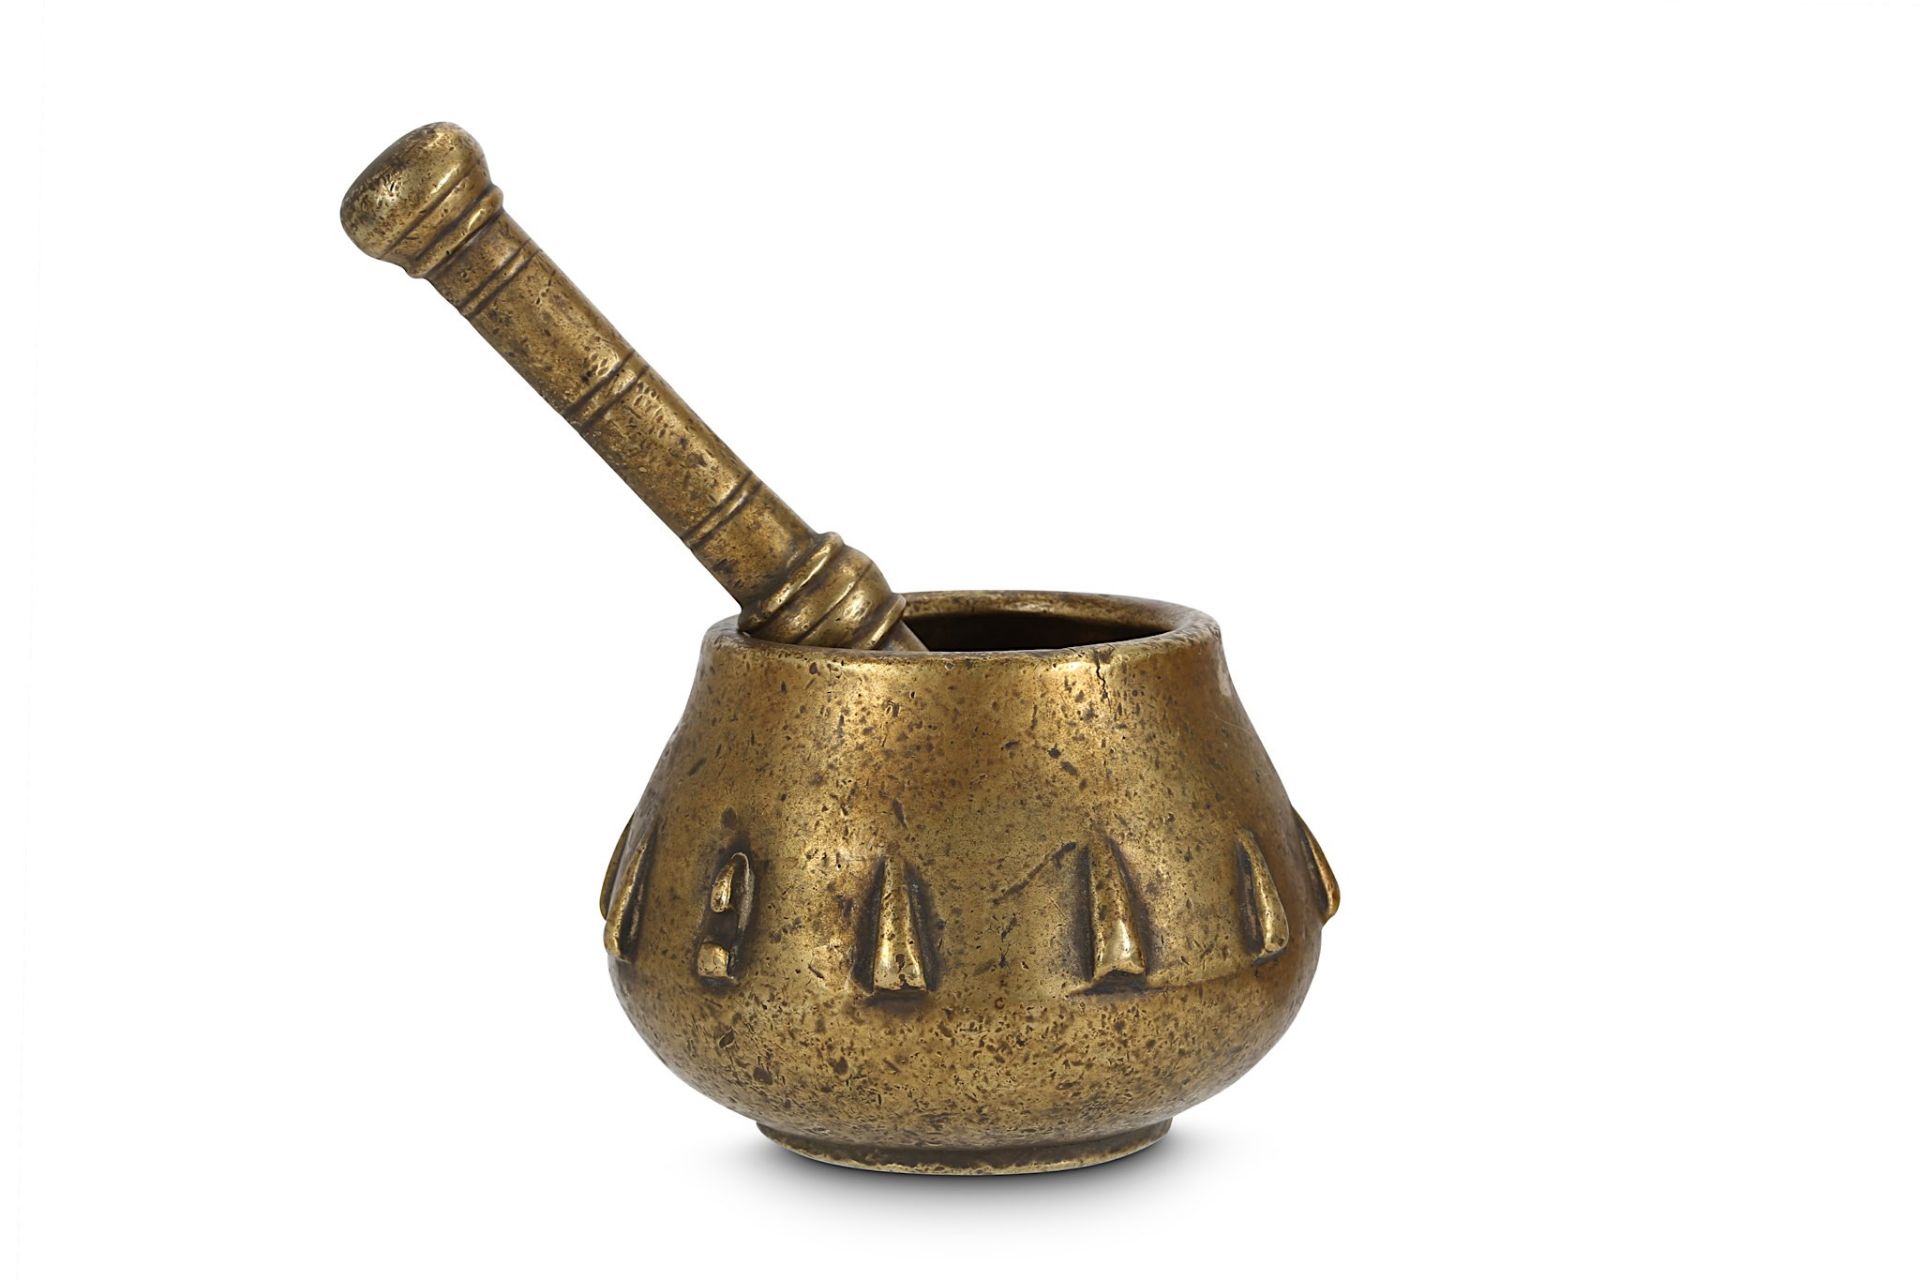 A BRASS MORTAR AND PESTLE Northern India, 18th century  The mortar of bulbous form with slightly